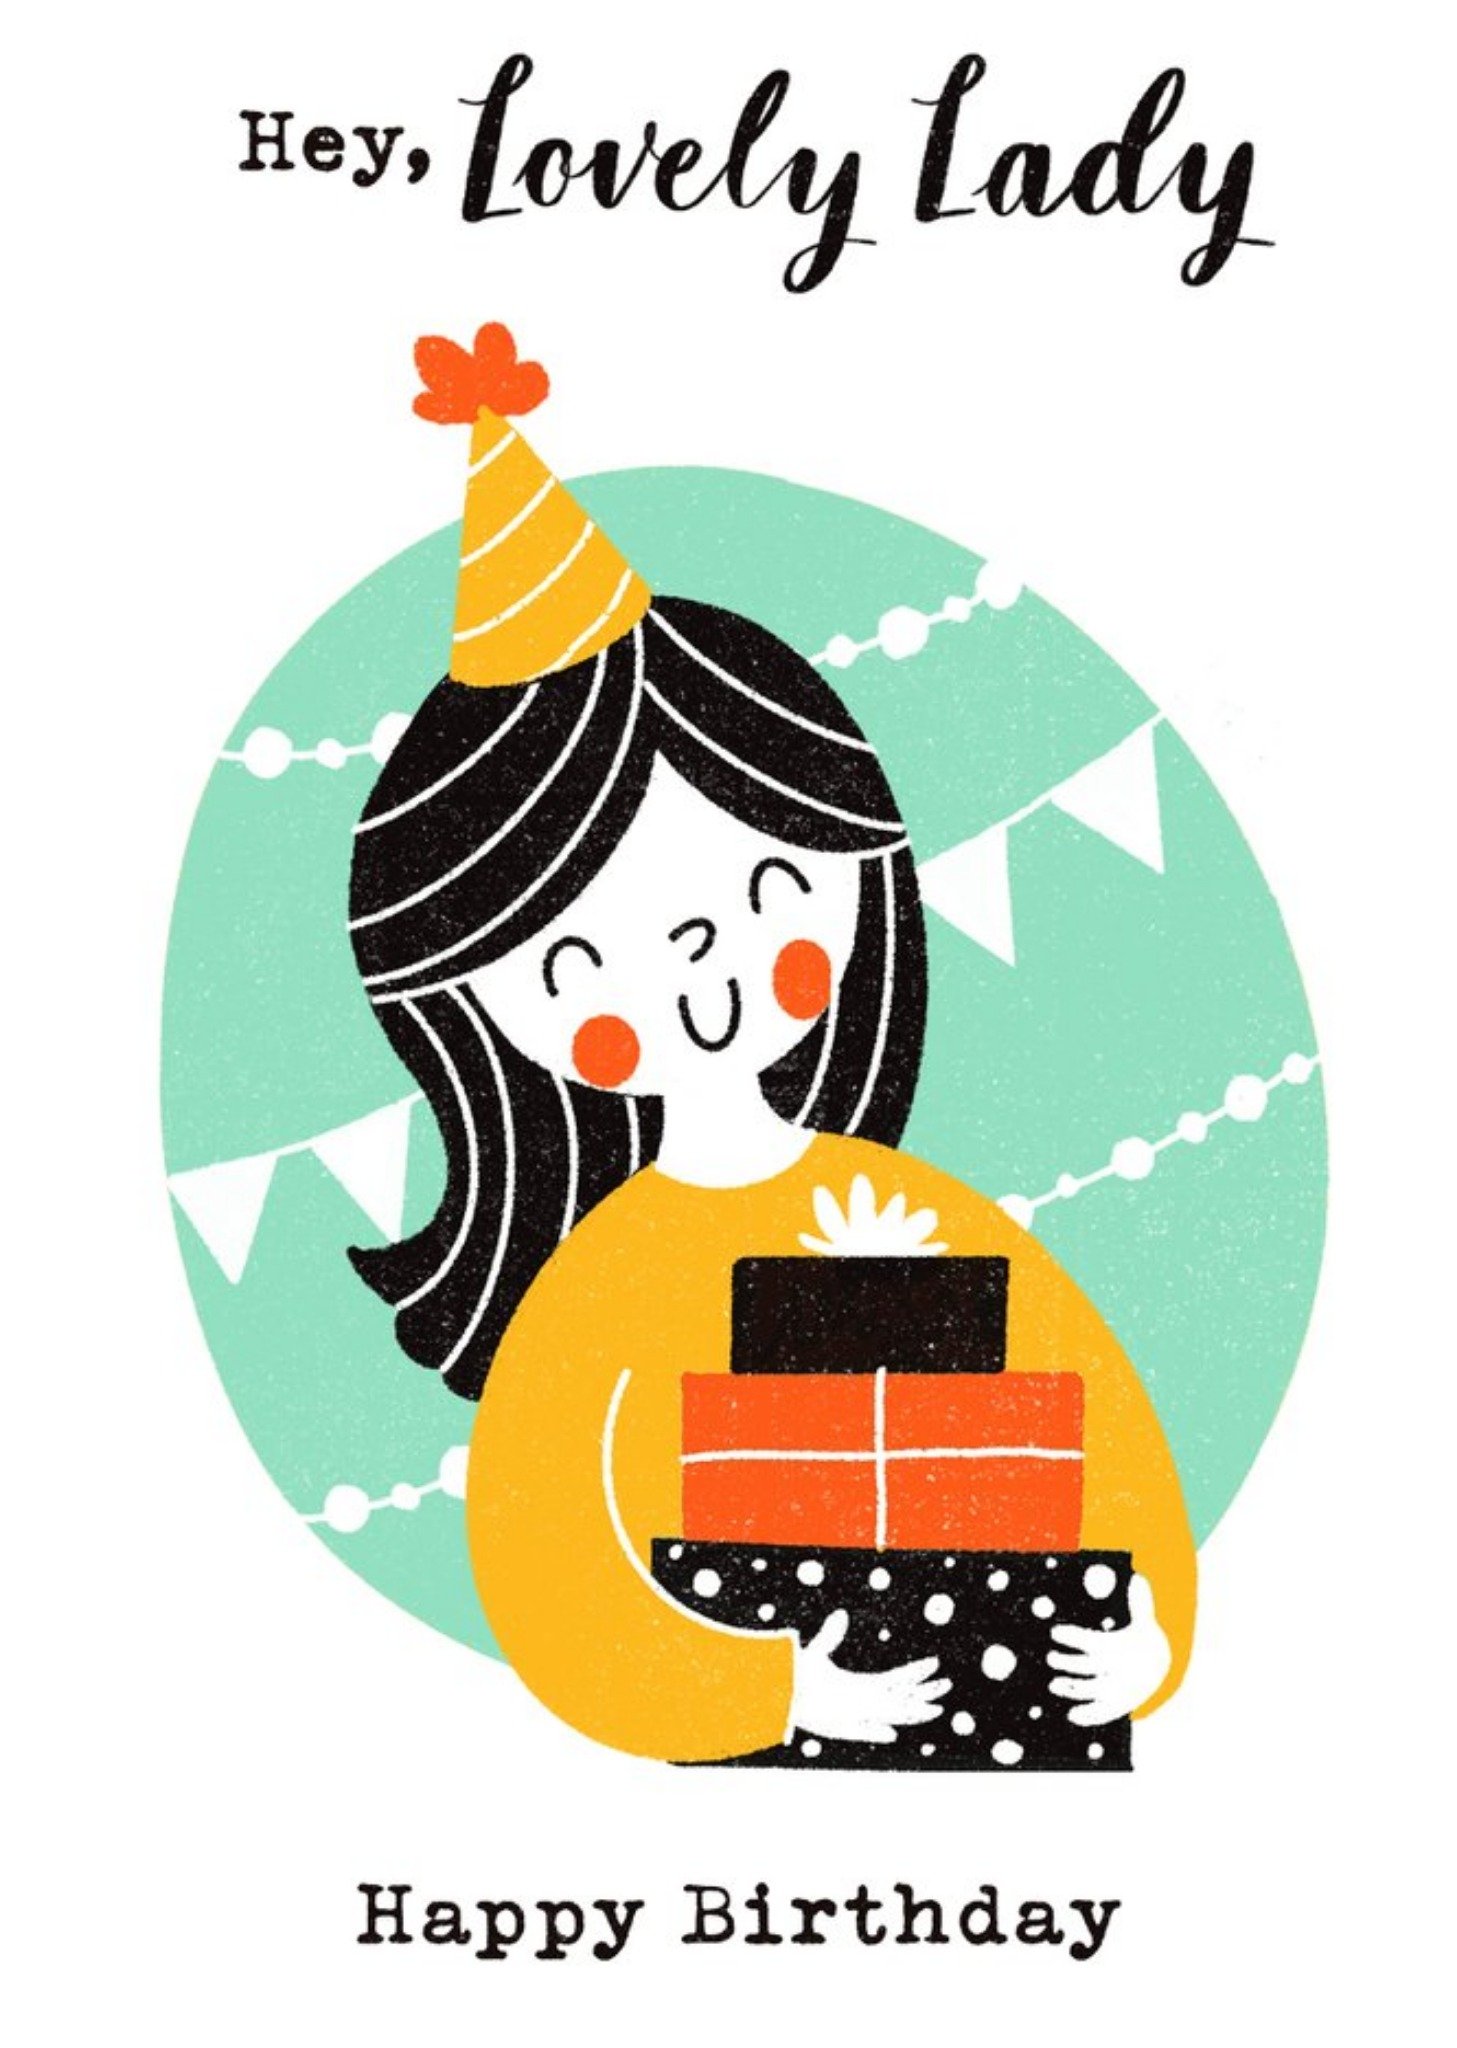 Moonpig Bright Illustration Of A Women Holding Presents Hey Lovely Lady Birthday Card, Large